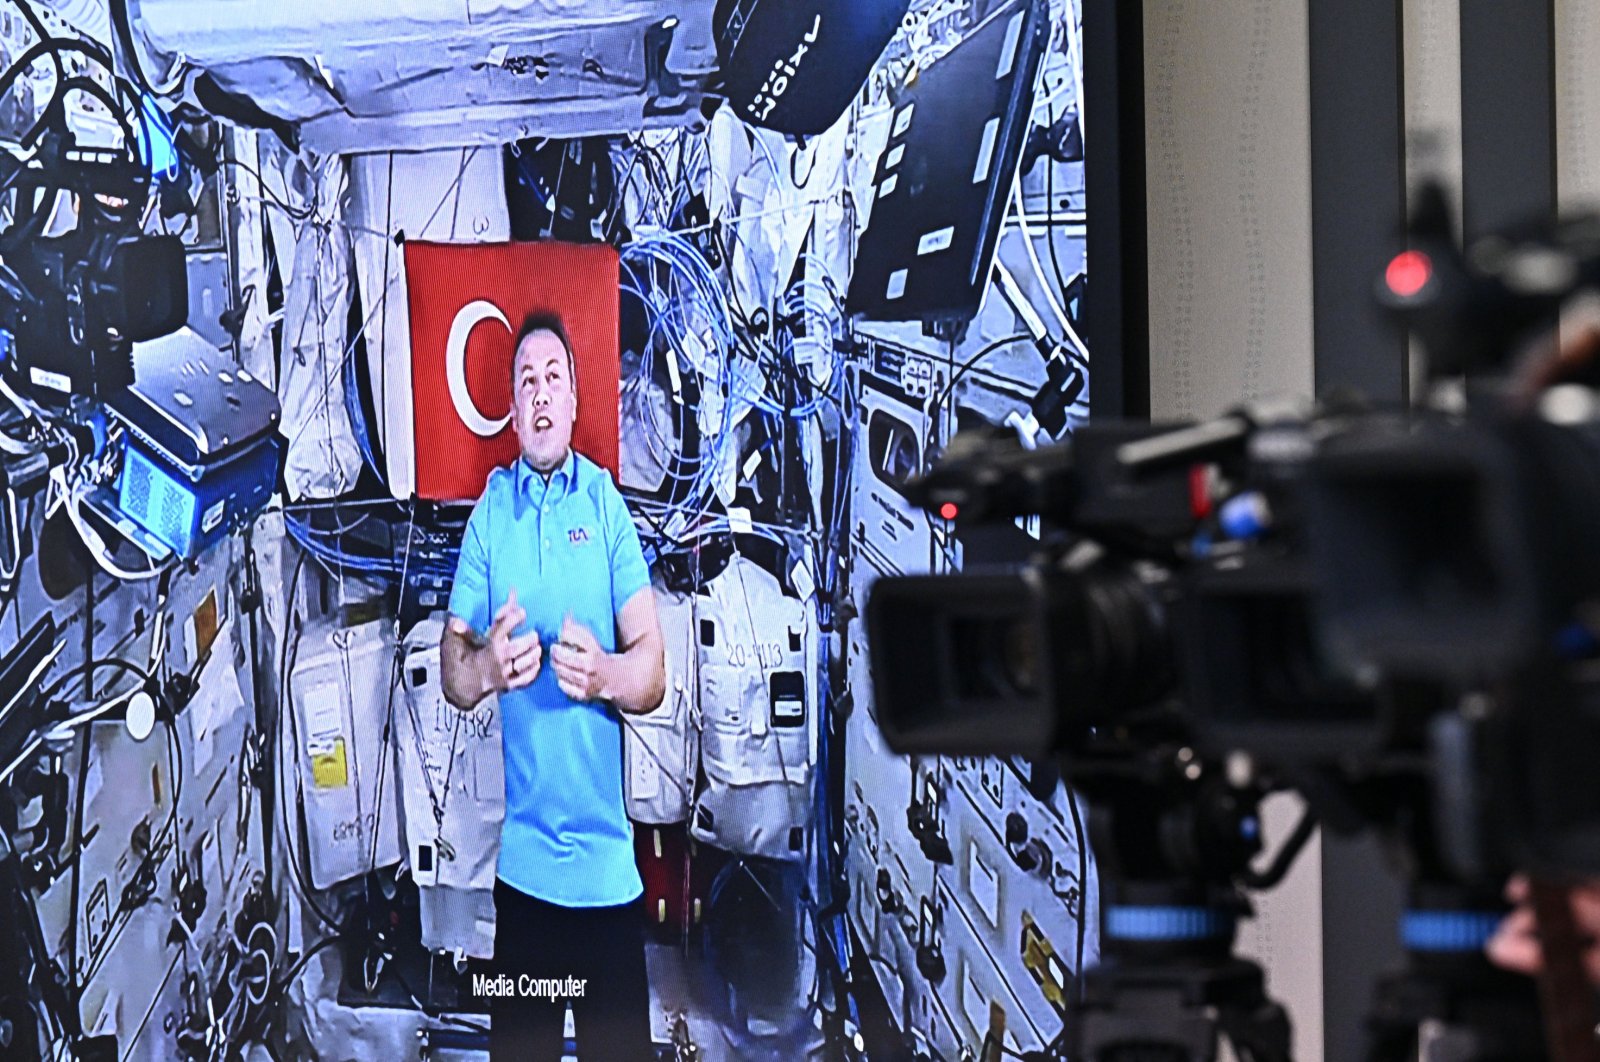 Türkiye’s 1st astronaut describes life in space with awe